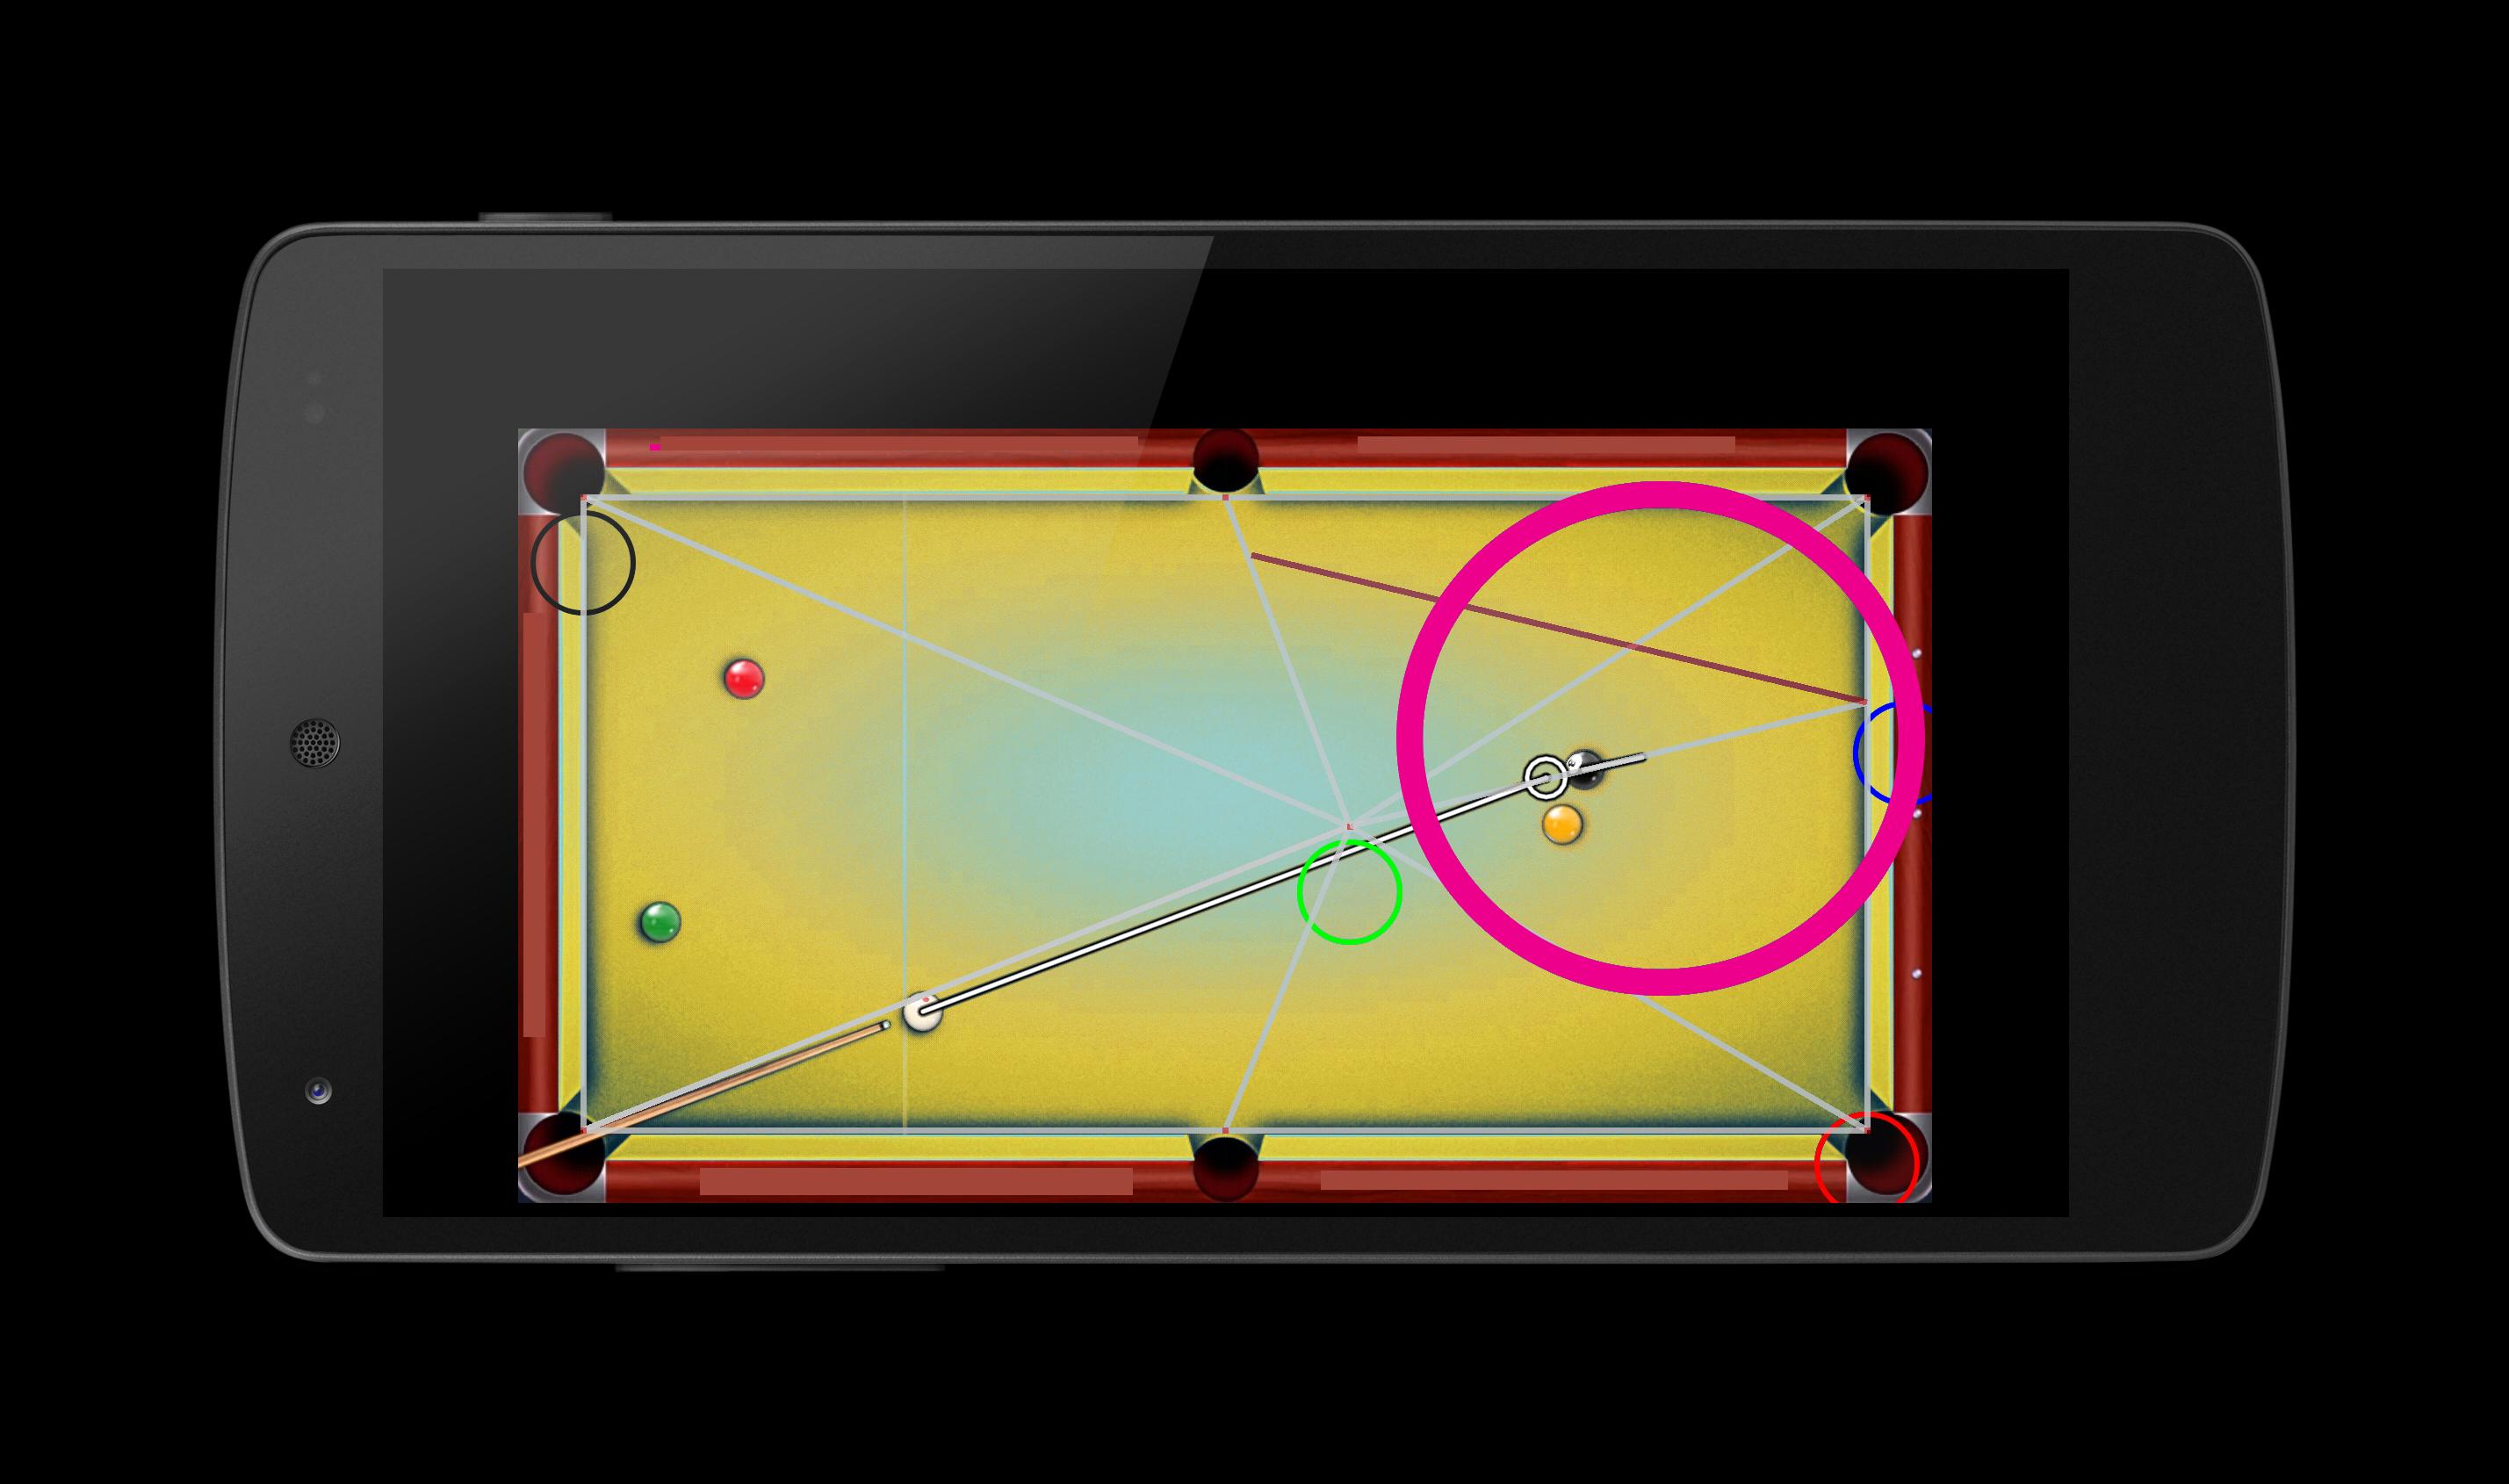 Tool for 8 Ball. Chtkghk8 Play Ball. Tools of Billiard.